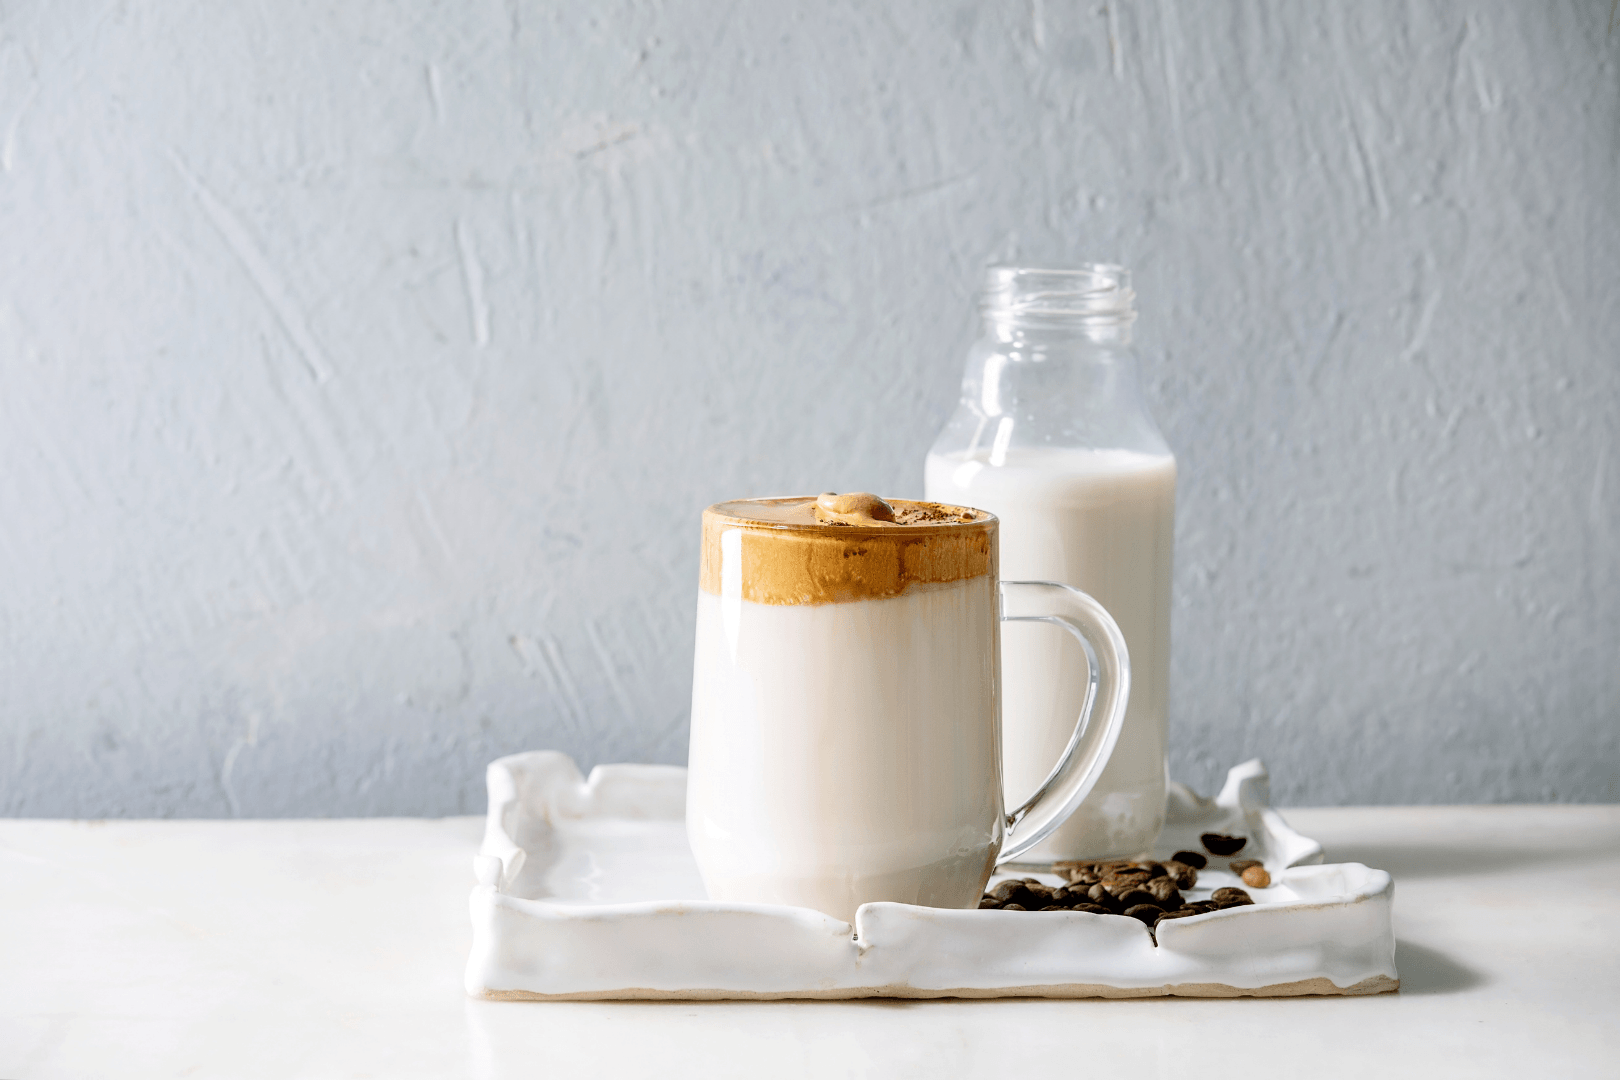 How To Froth Without A Milk Frother - Zulay Kitchen